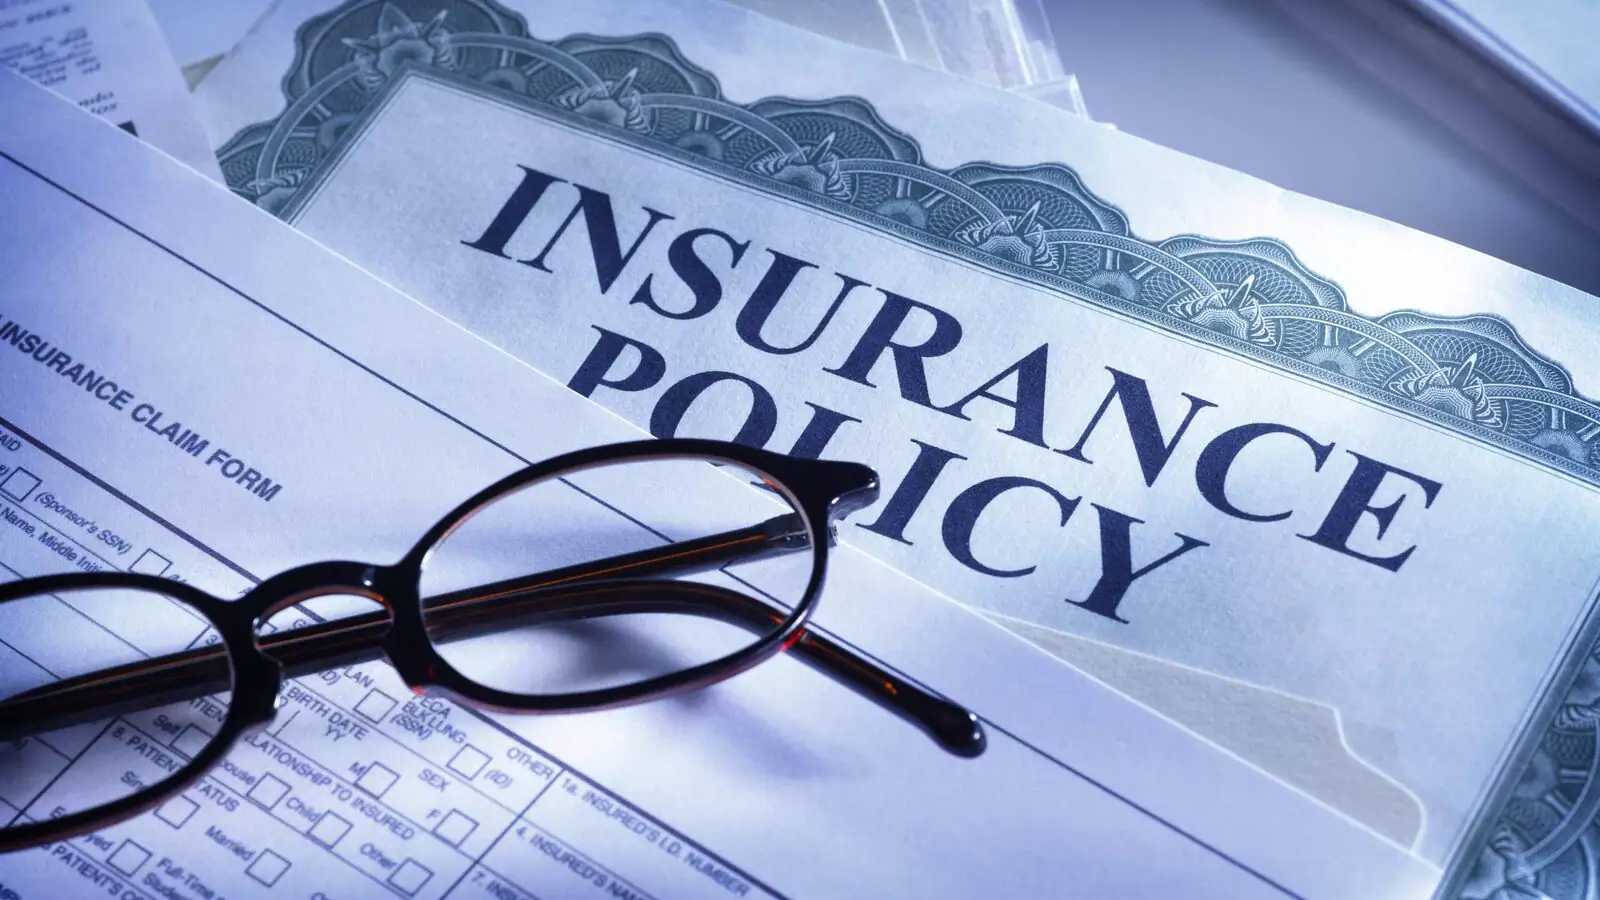 Was Your Claim Rejected by the Insurance Company?